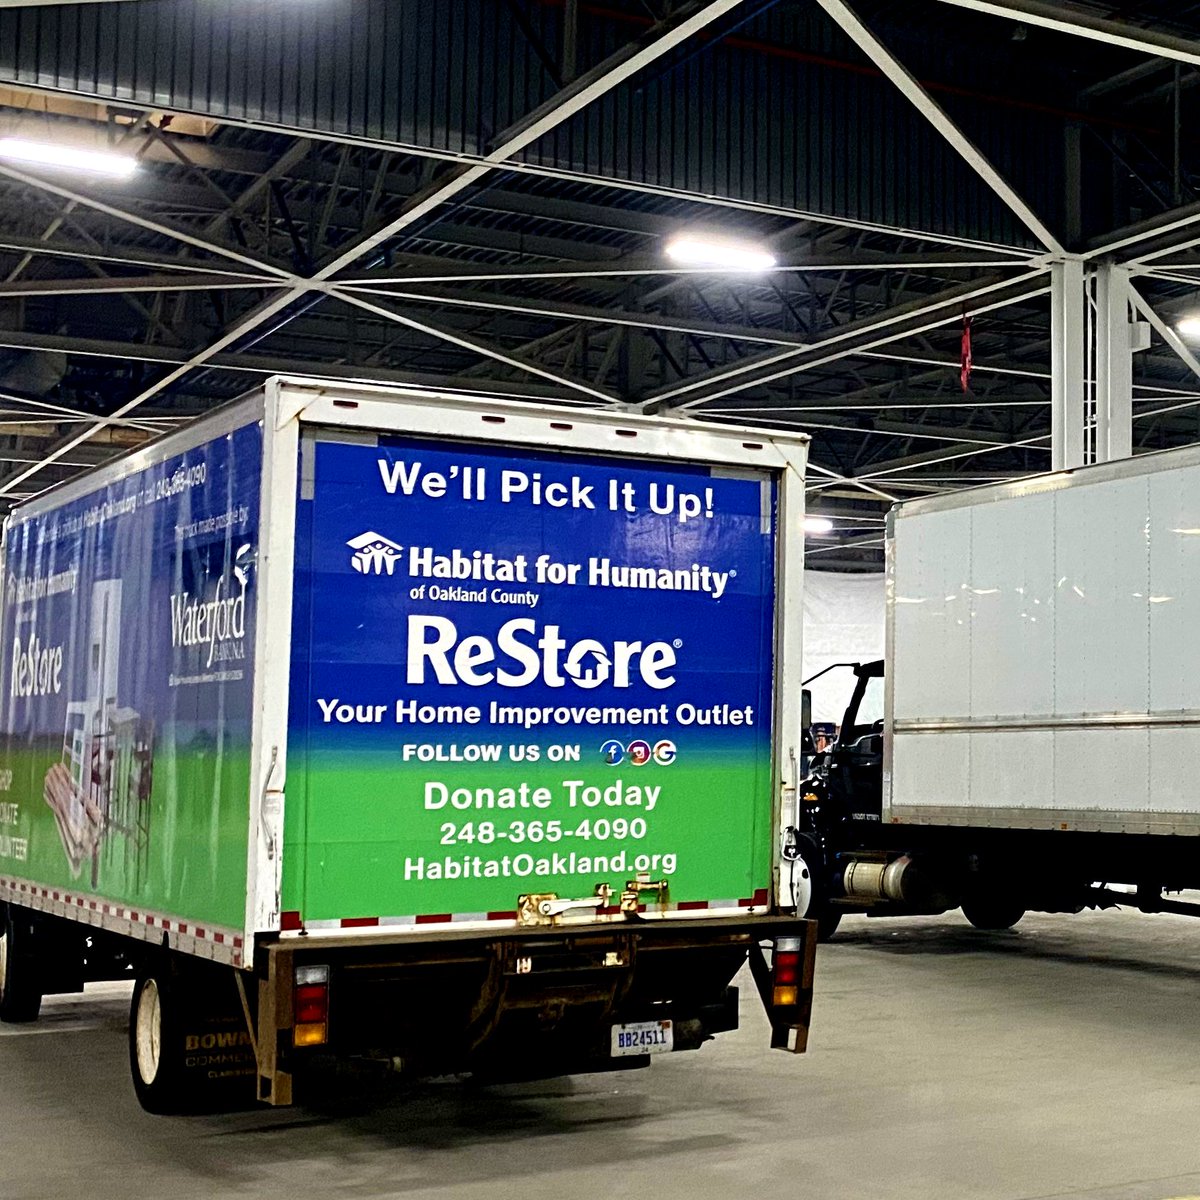 It’s #EarthDay, so let’s celebrate some good.

As our Orion Assembly plant in MI renovates their facility, they’ve partnered with Habitat for Humanity to repurpose over 14,000 sq. ft. of plywood, which will be used to create more affordable homes around Oakland County. ❤️🌎❤️